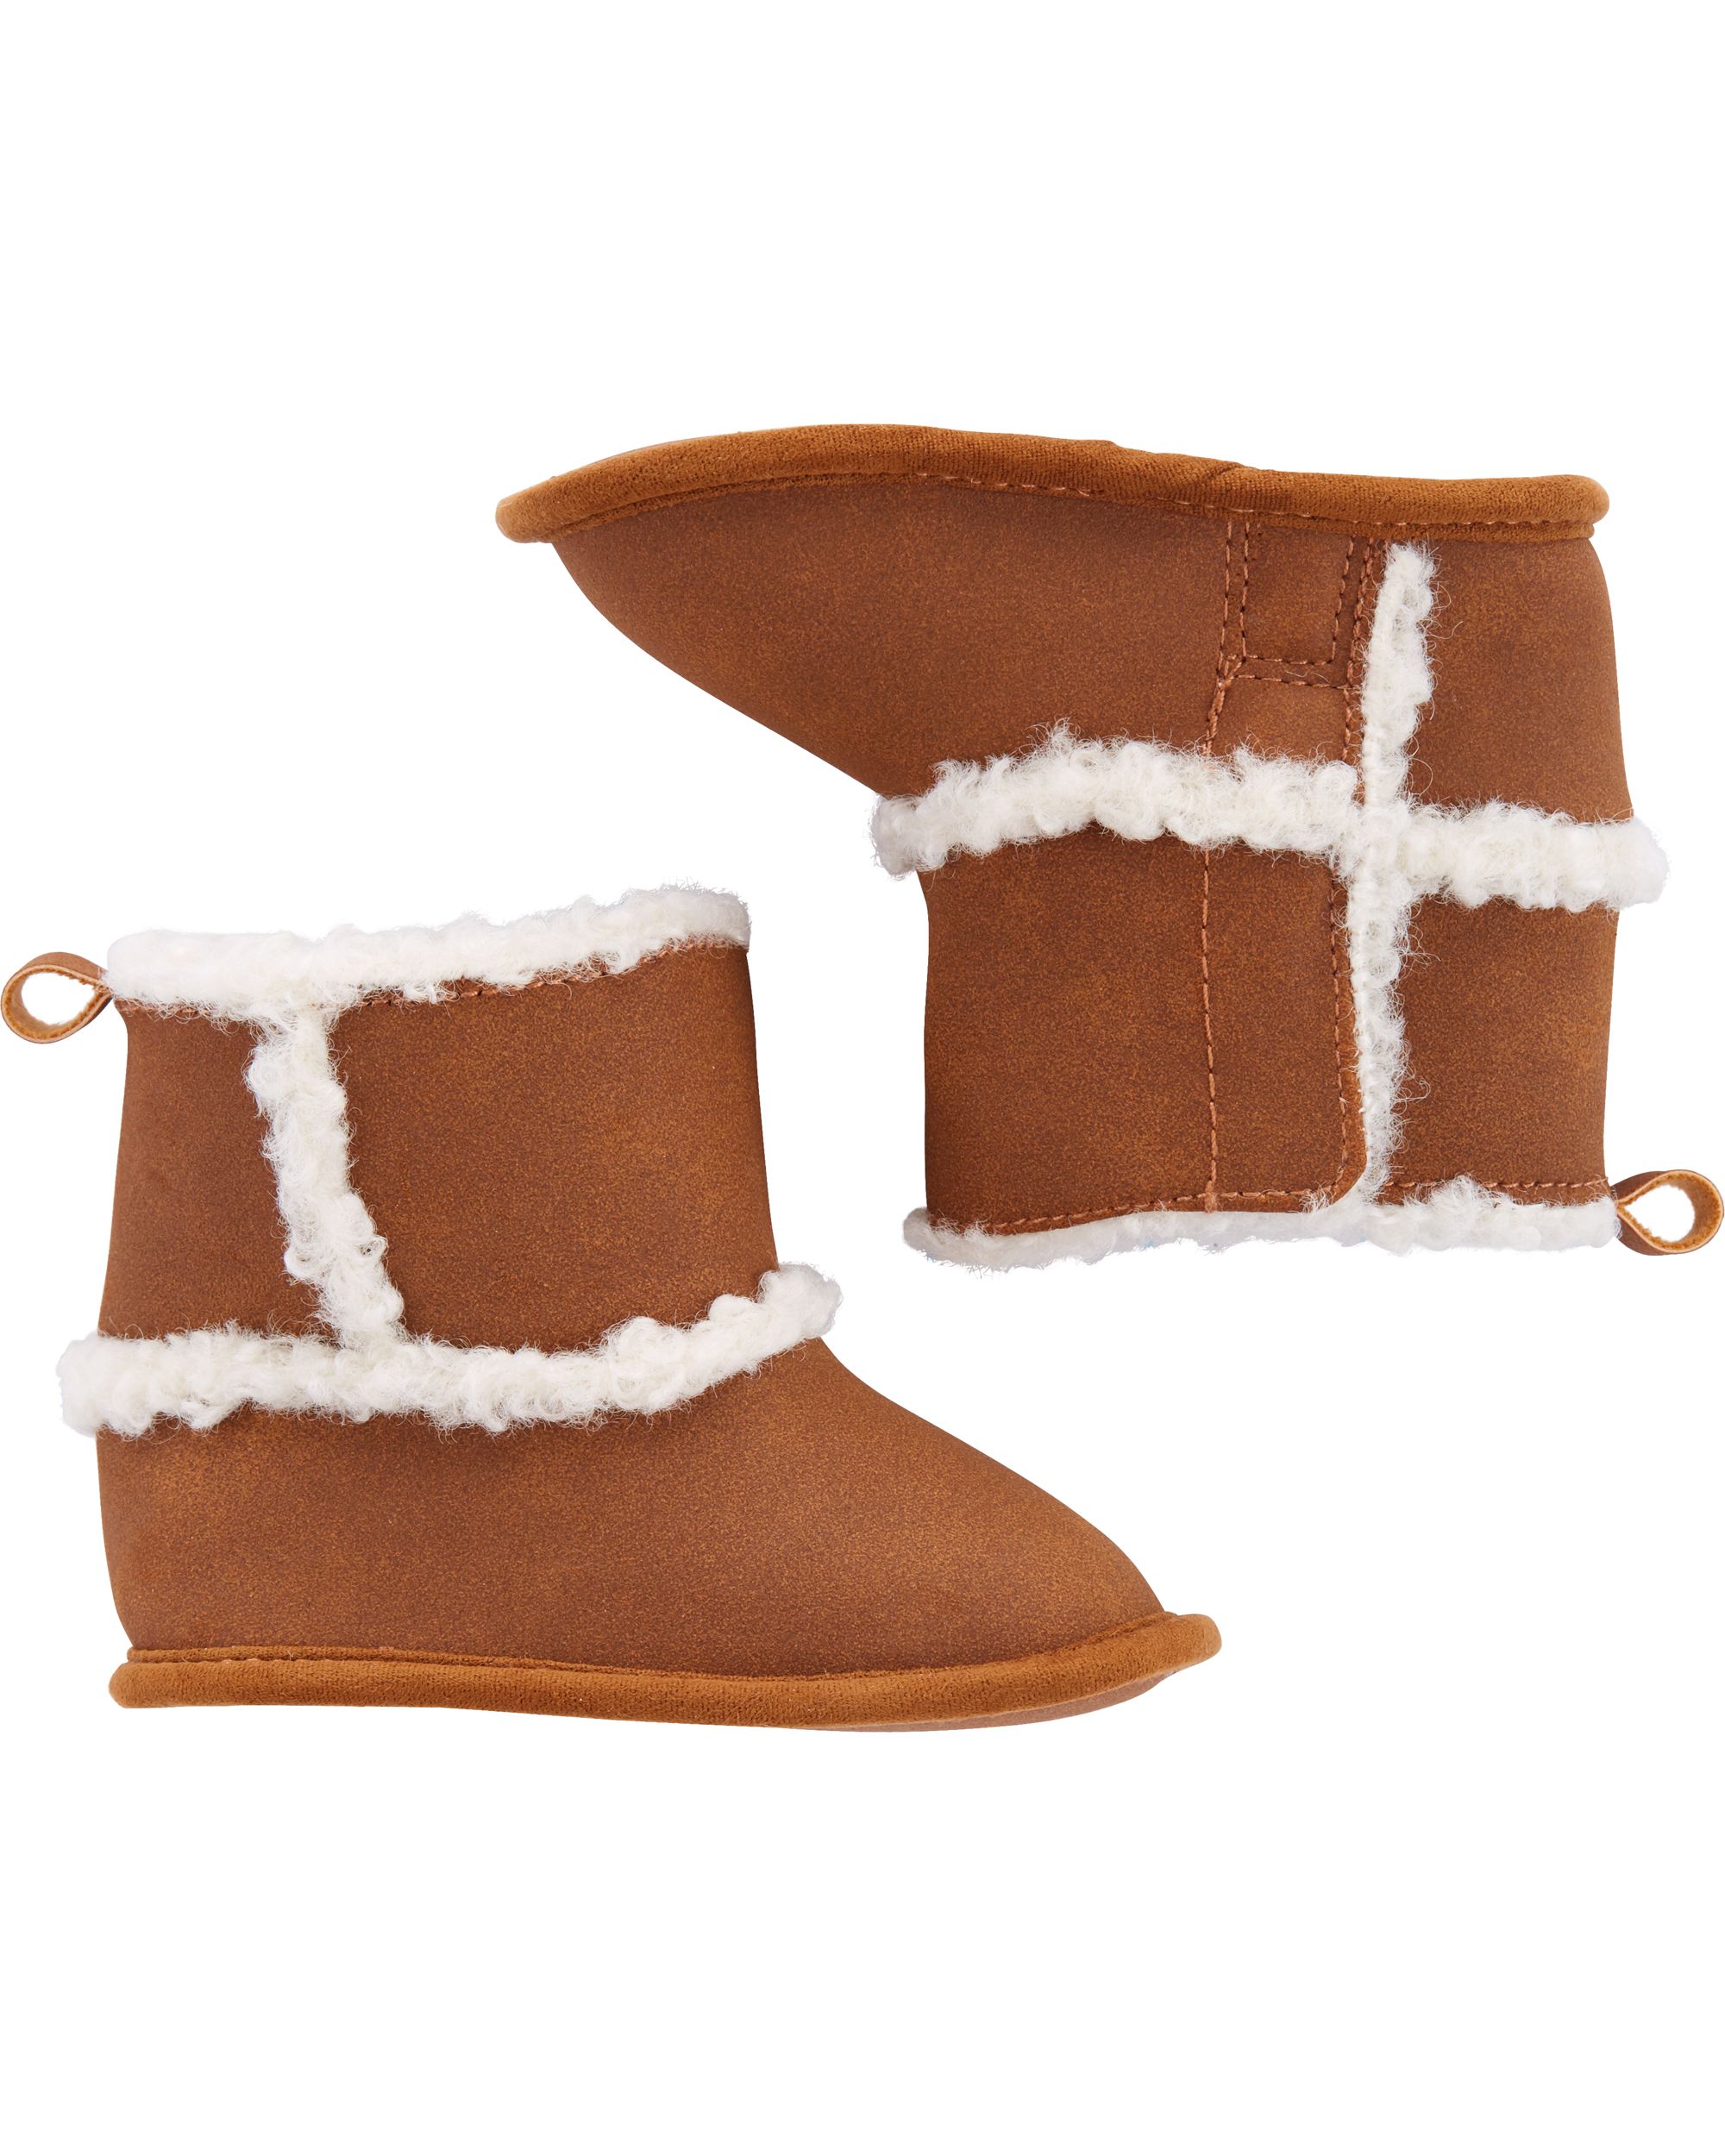 Carter's Sherpa Baby Boots | Carter's